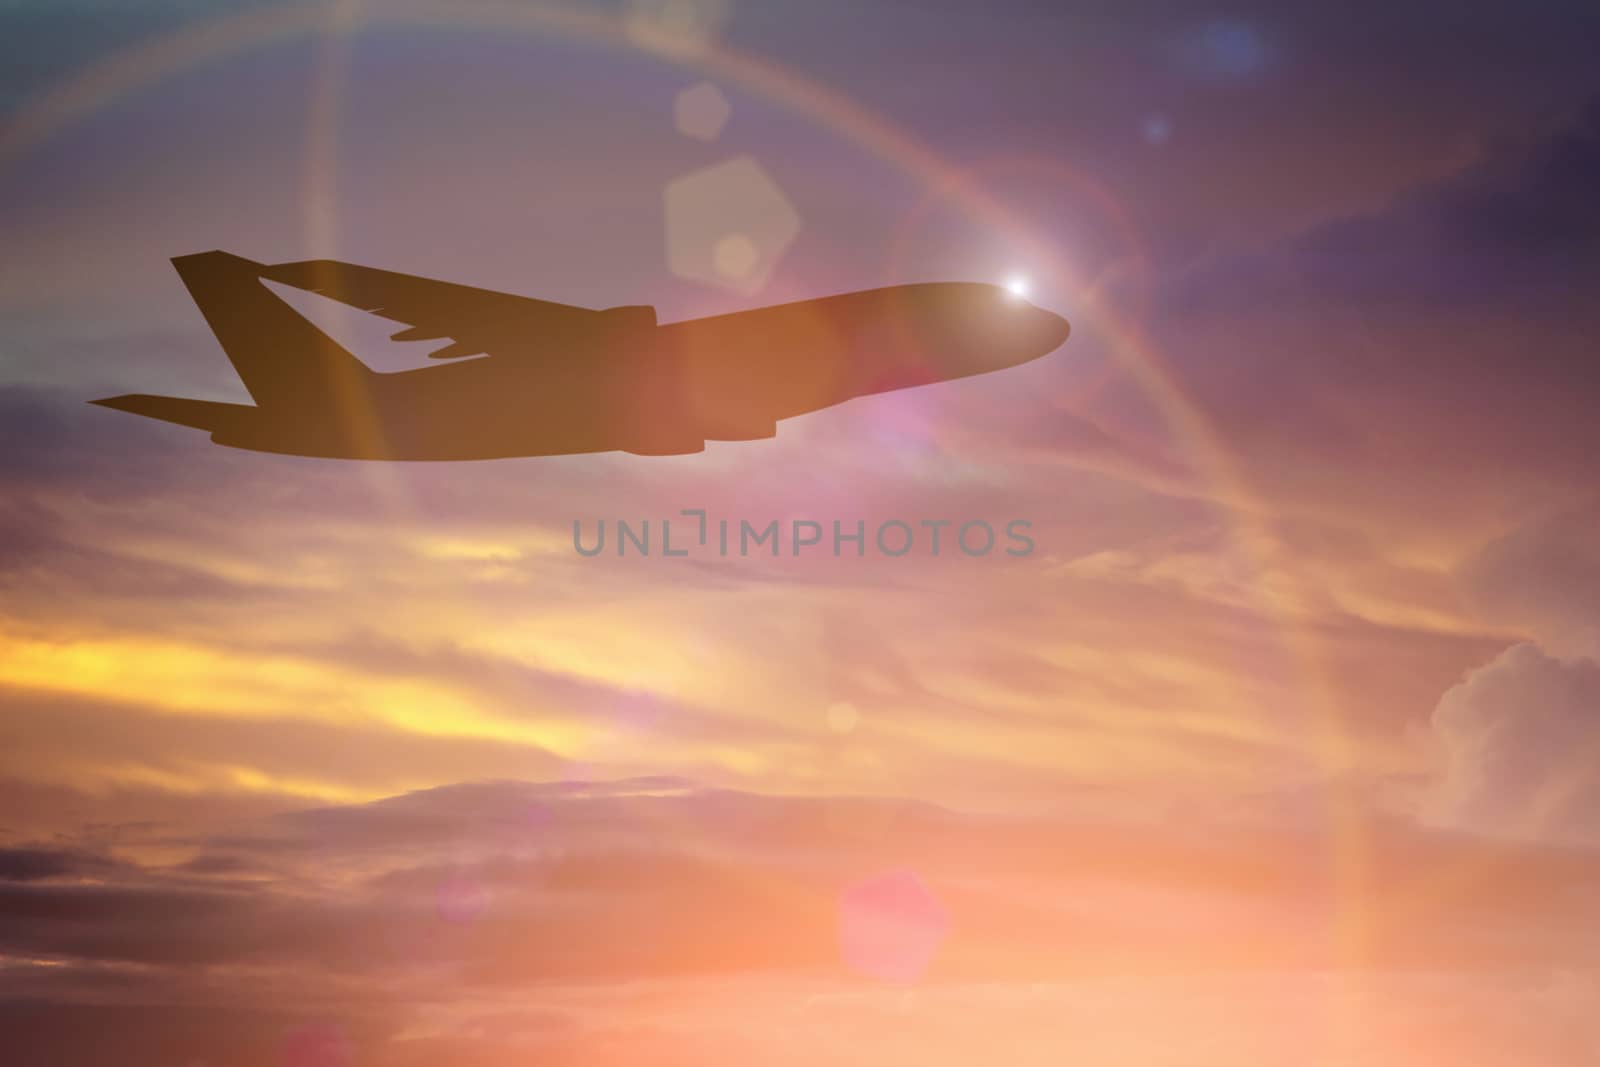 Silhouette of Airplane take off on the Colorful dramatic sky with cloud at sunset background.